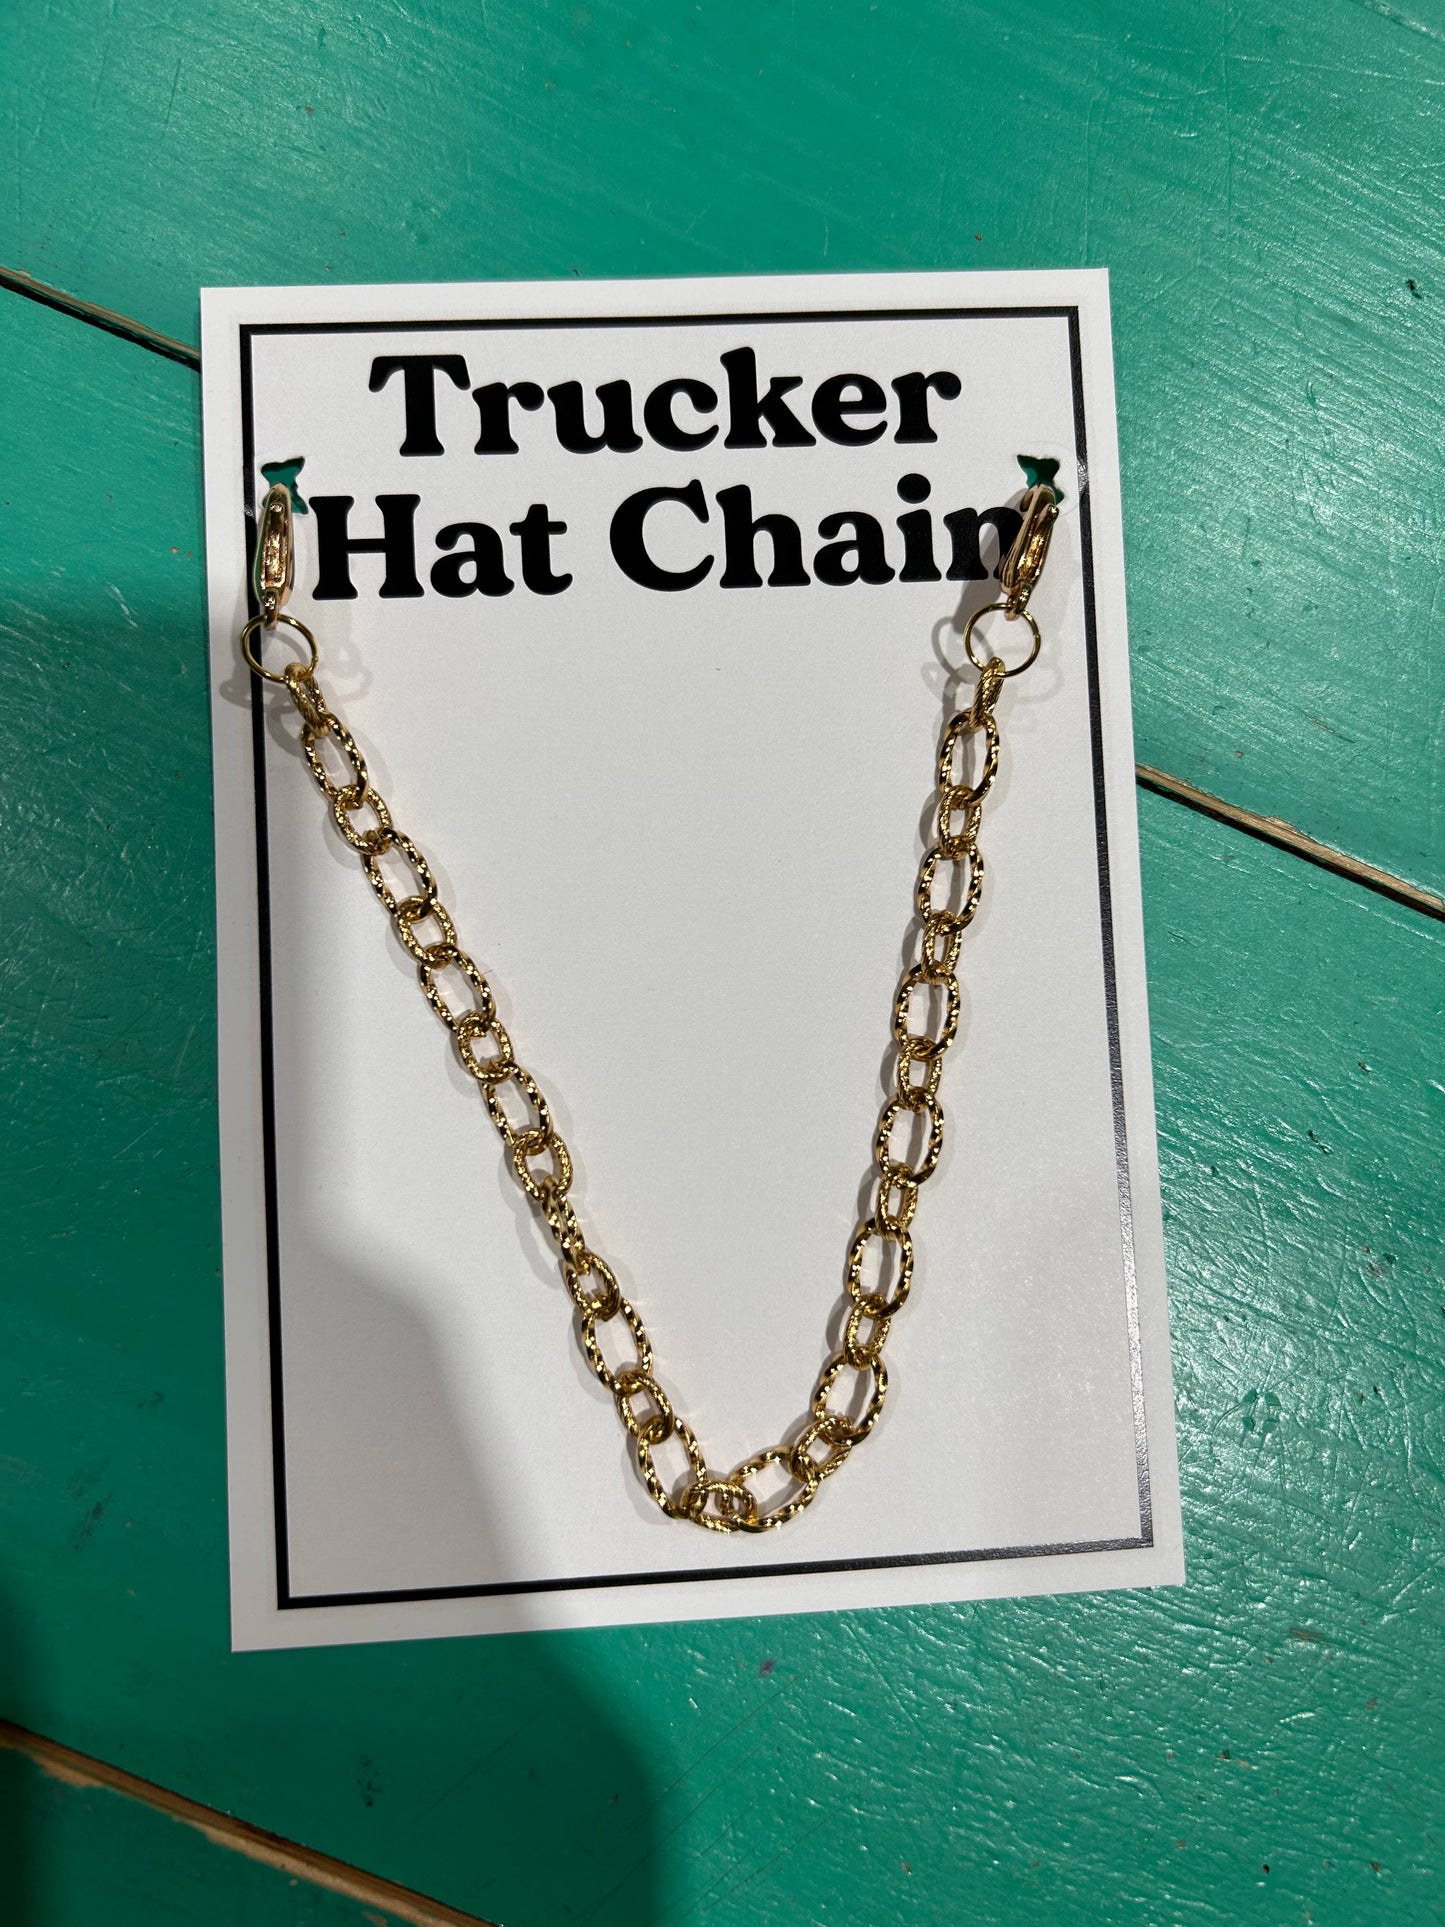 Twisted Links Trucker Hat Chain